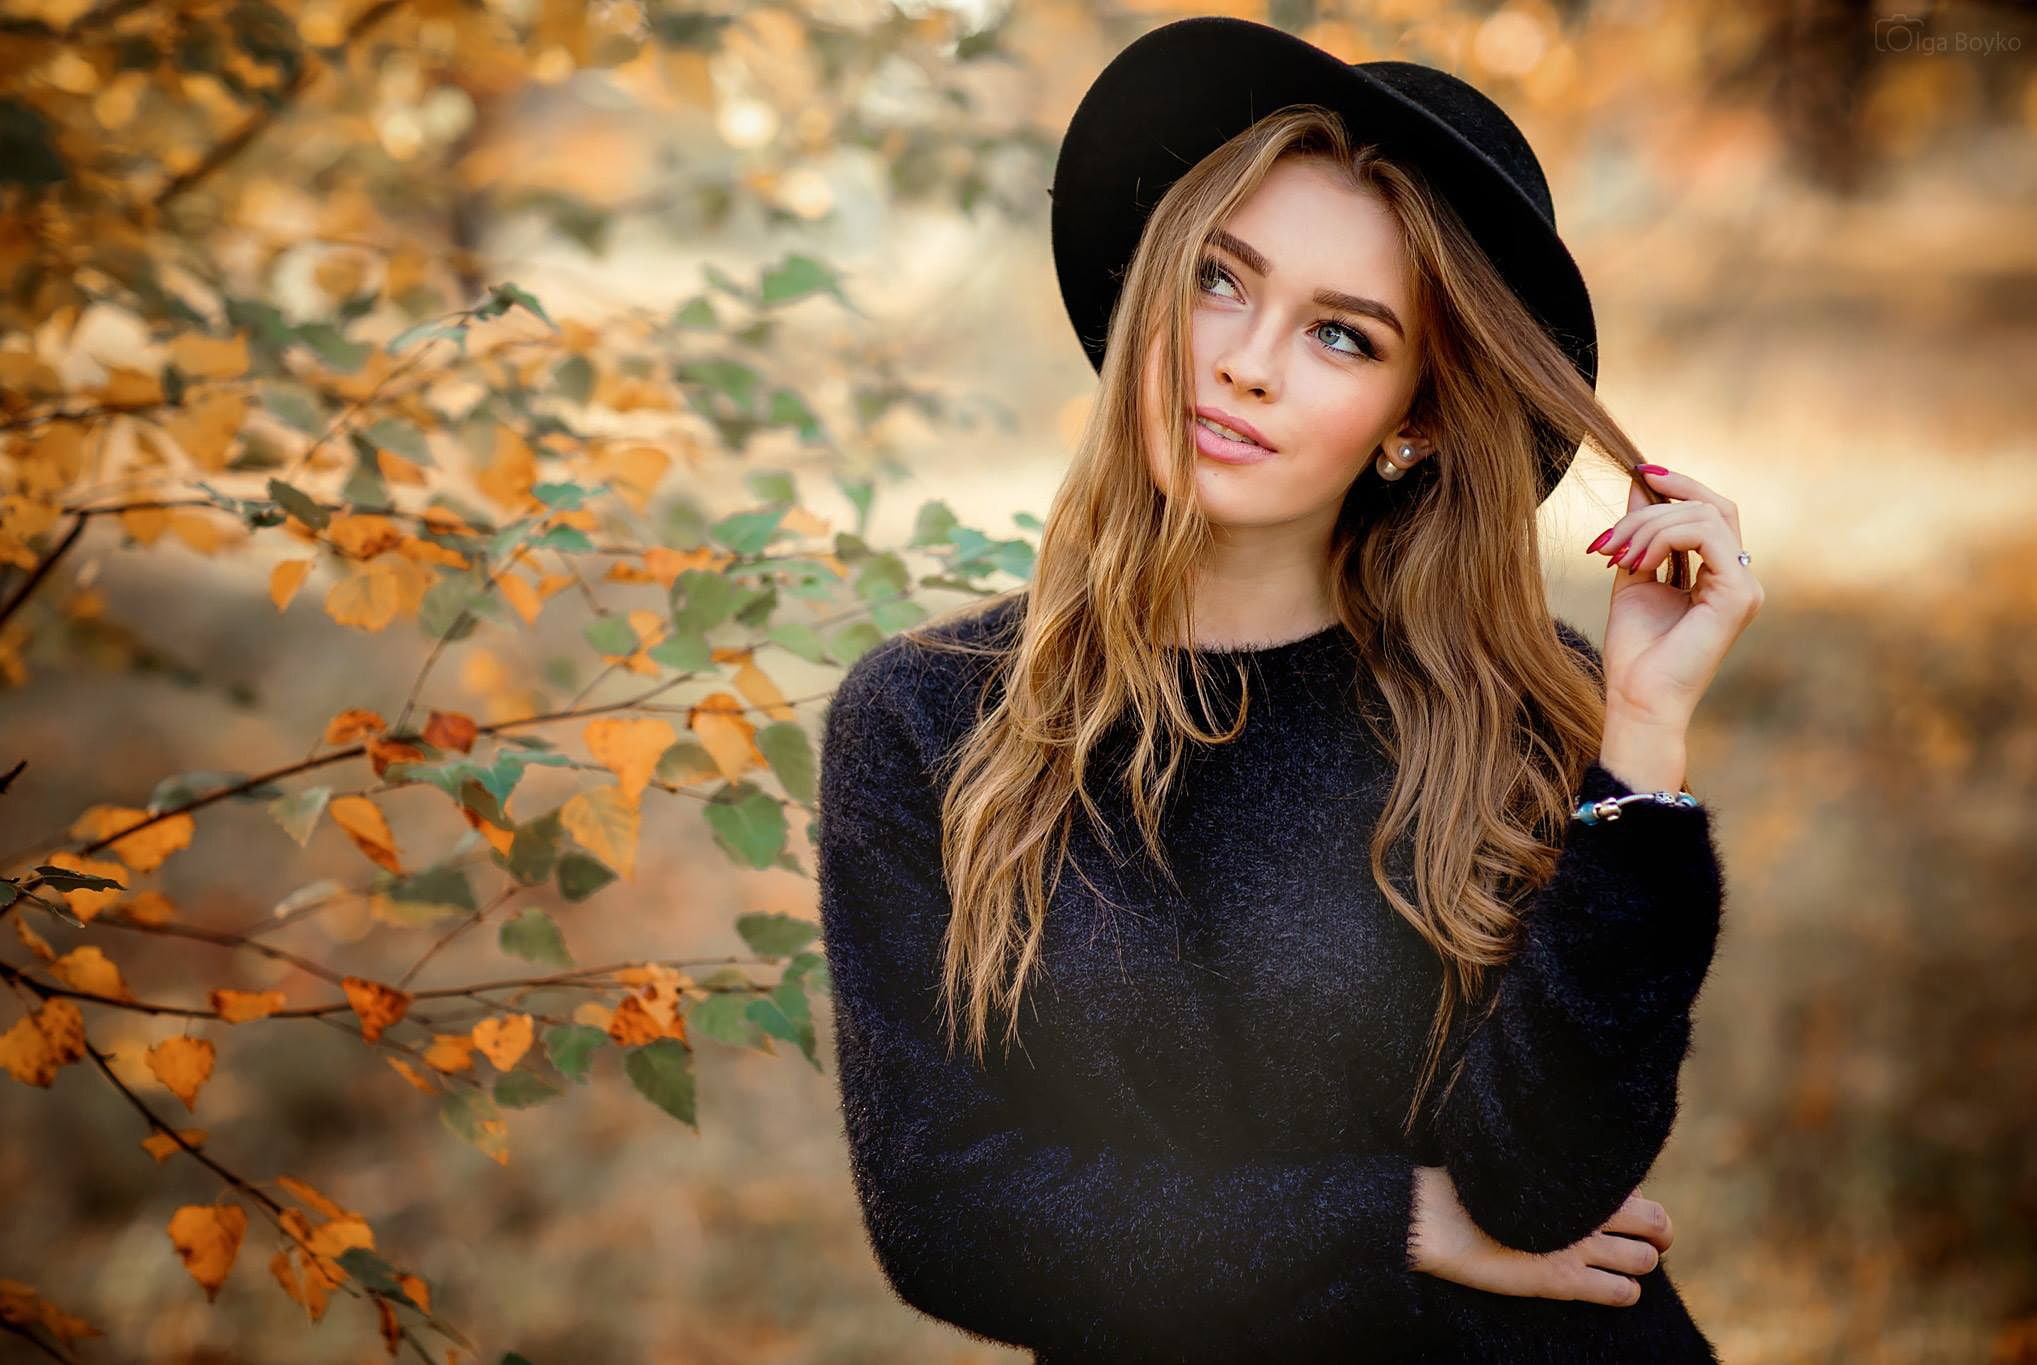 women's black long-sleeved shirt, autumn, leaves, branches, pose